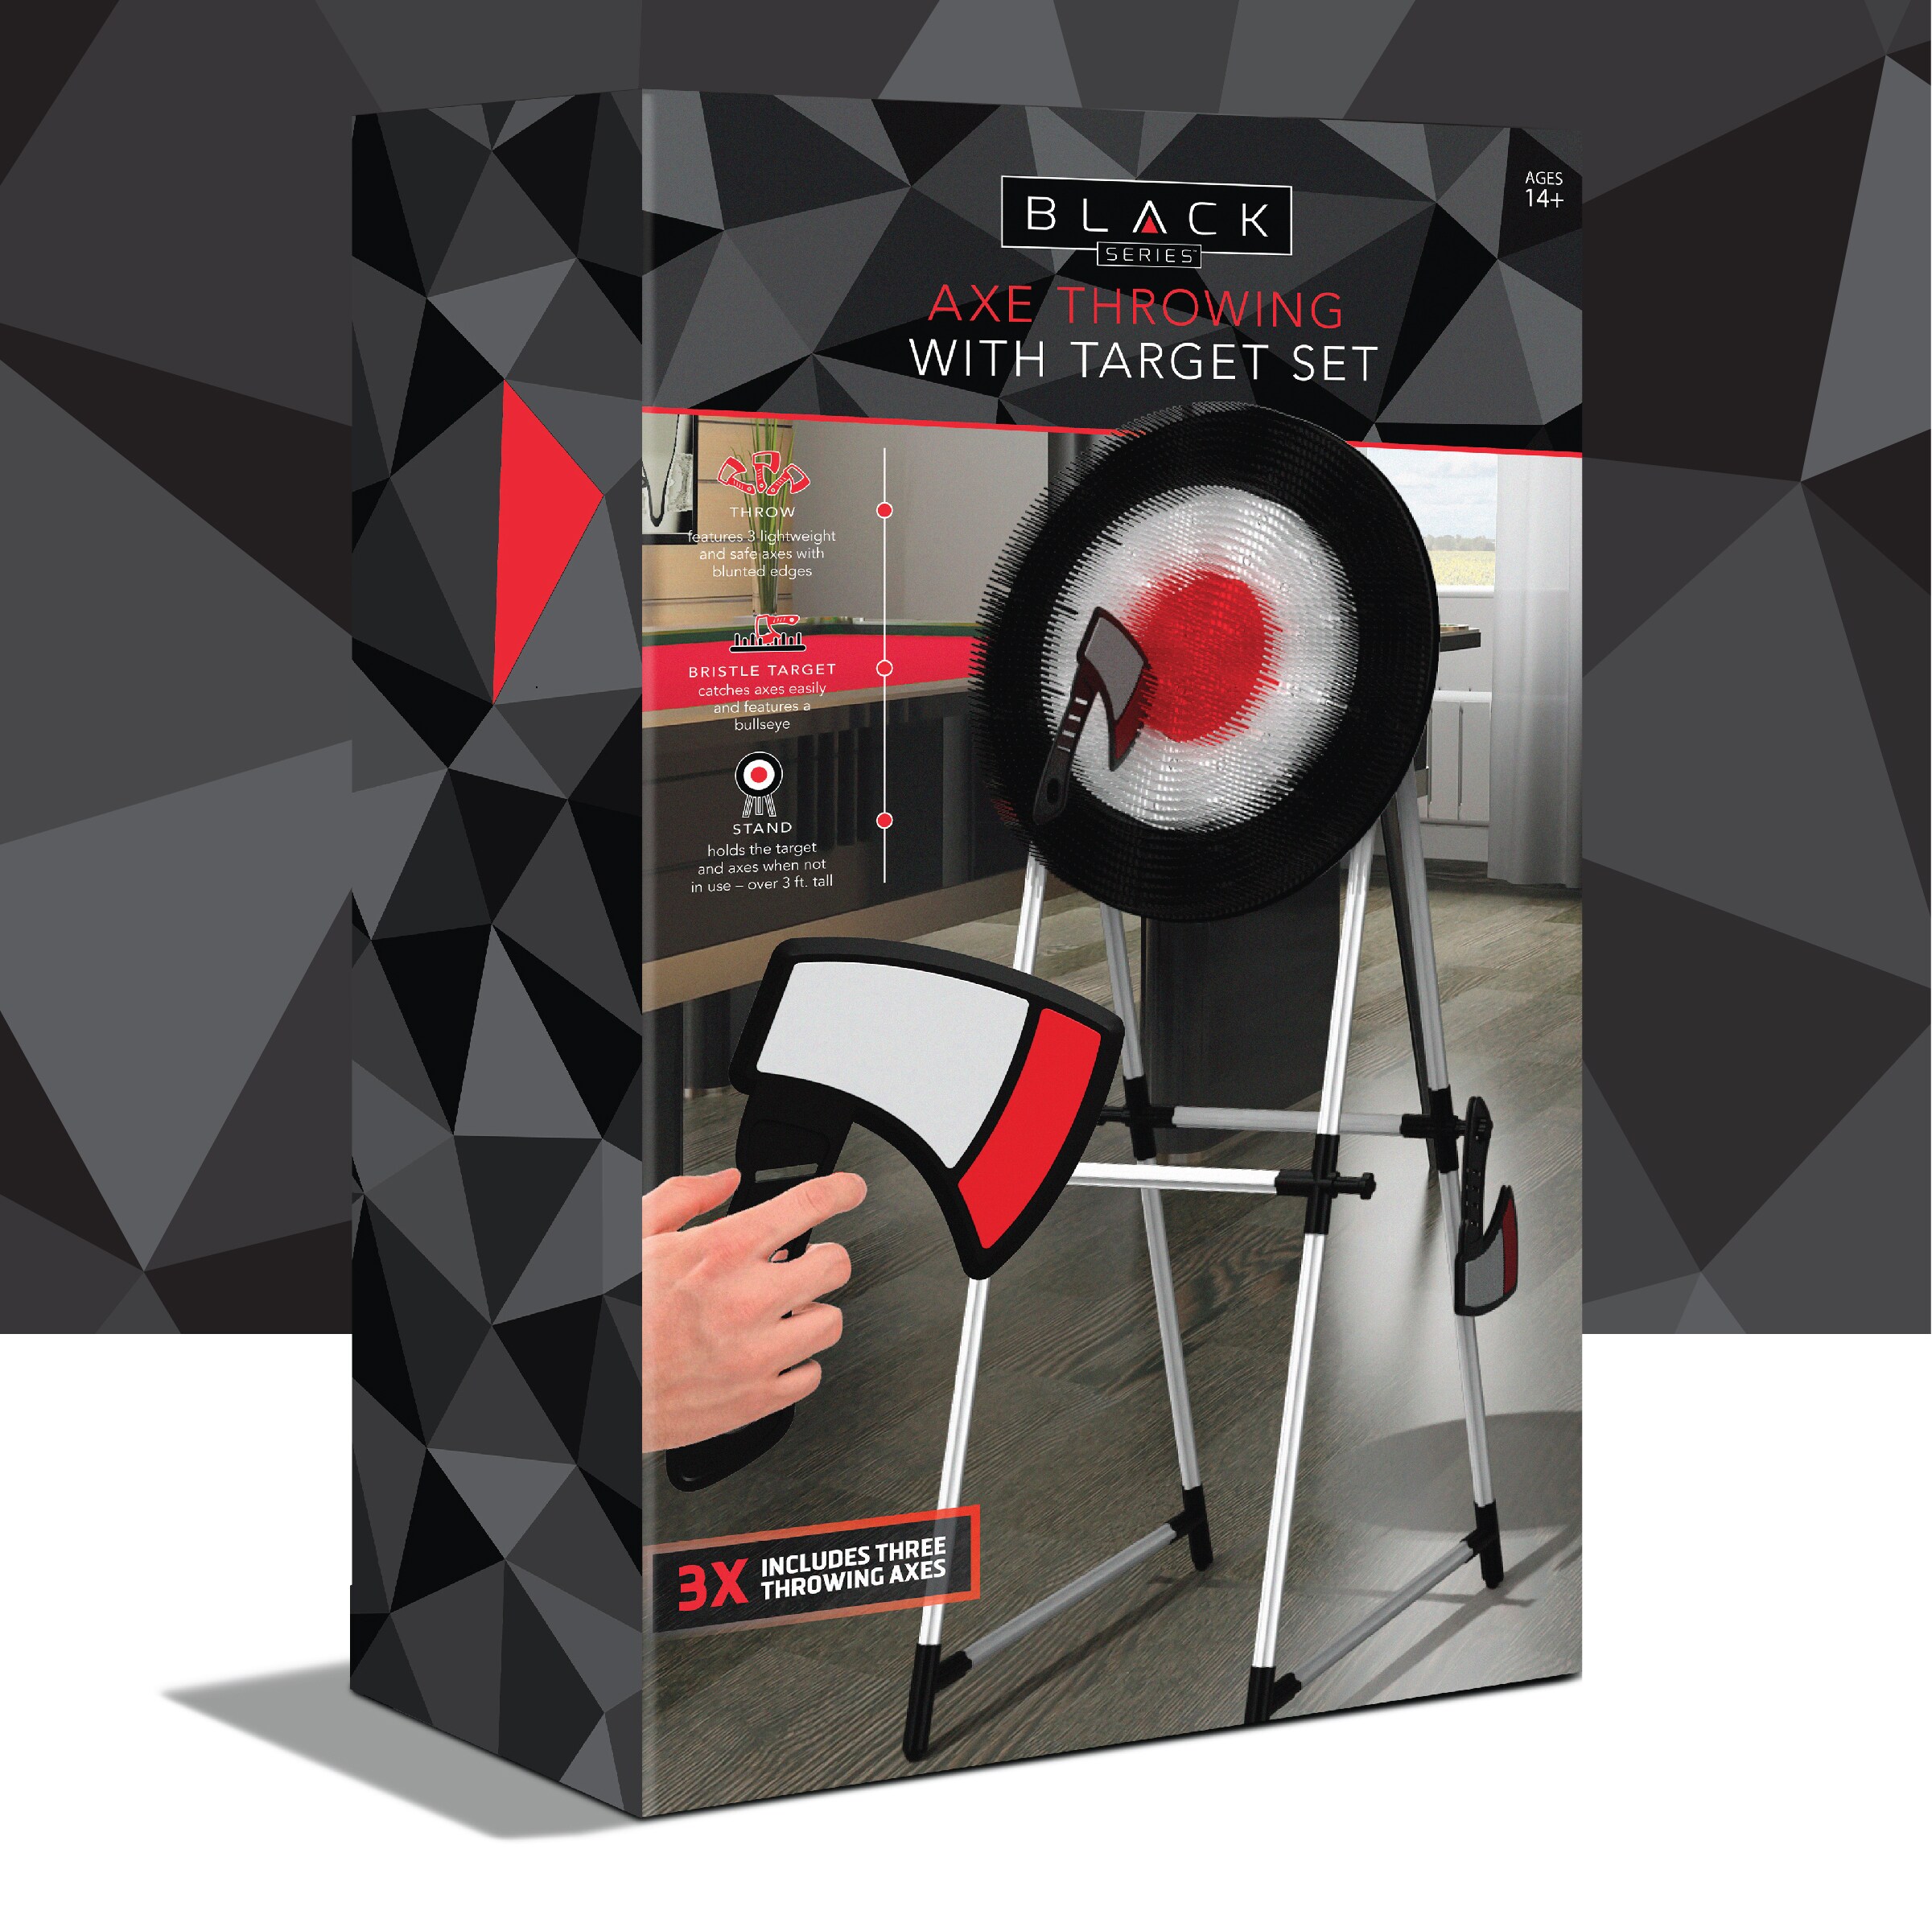 Foam Axe Throwing Target Set 3 Throwing Axes and Bristle Target w/Target Stand 